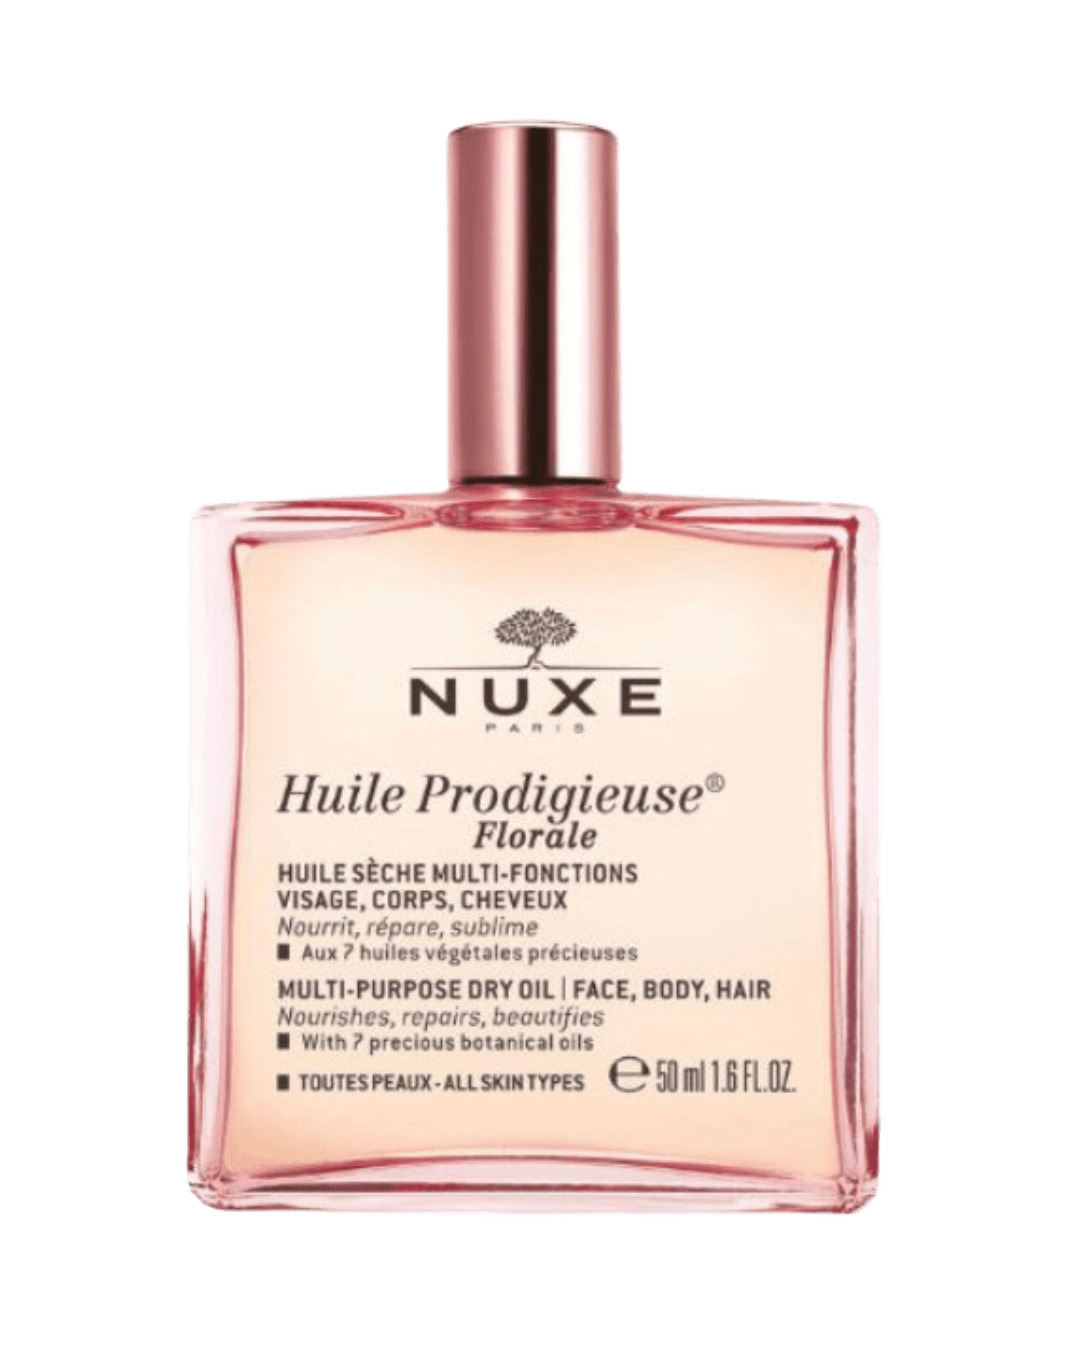 Daily Vanity Beauty Awards 2024 Best  Nuxe Huile Prodigieuse® Florale Voted By Beauty Experts